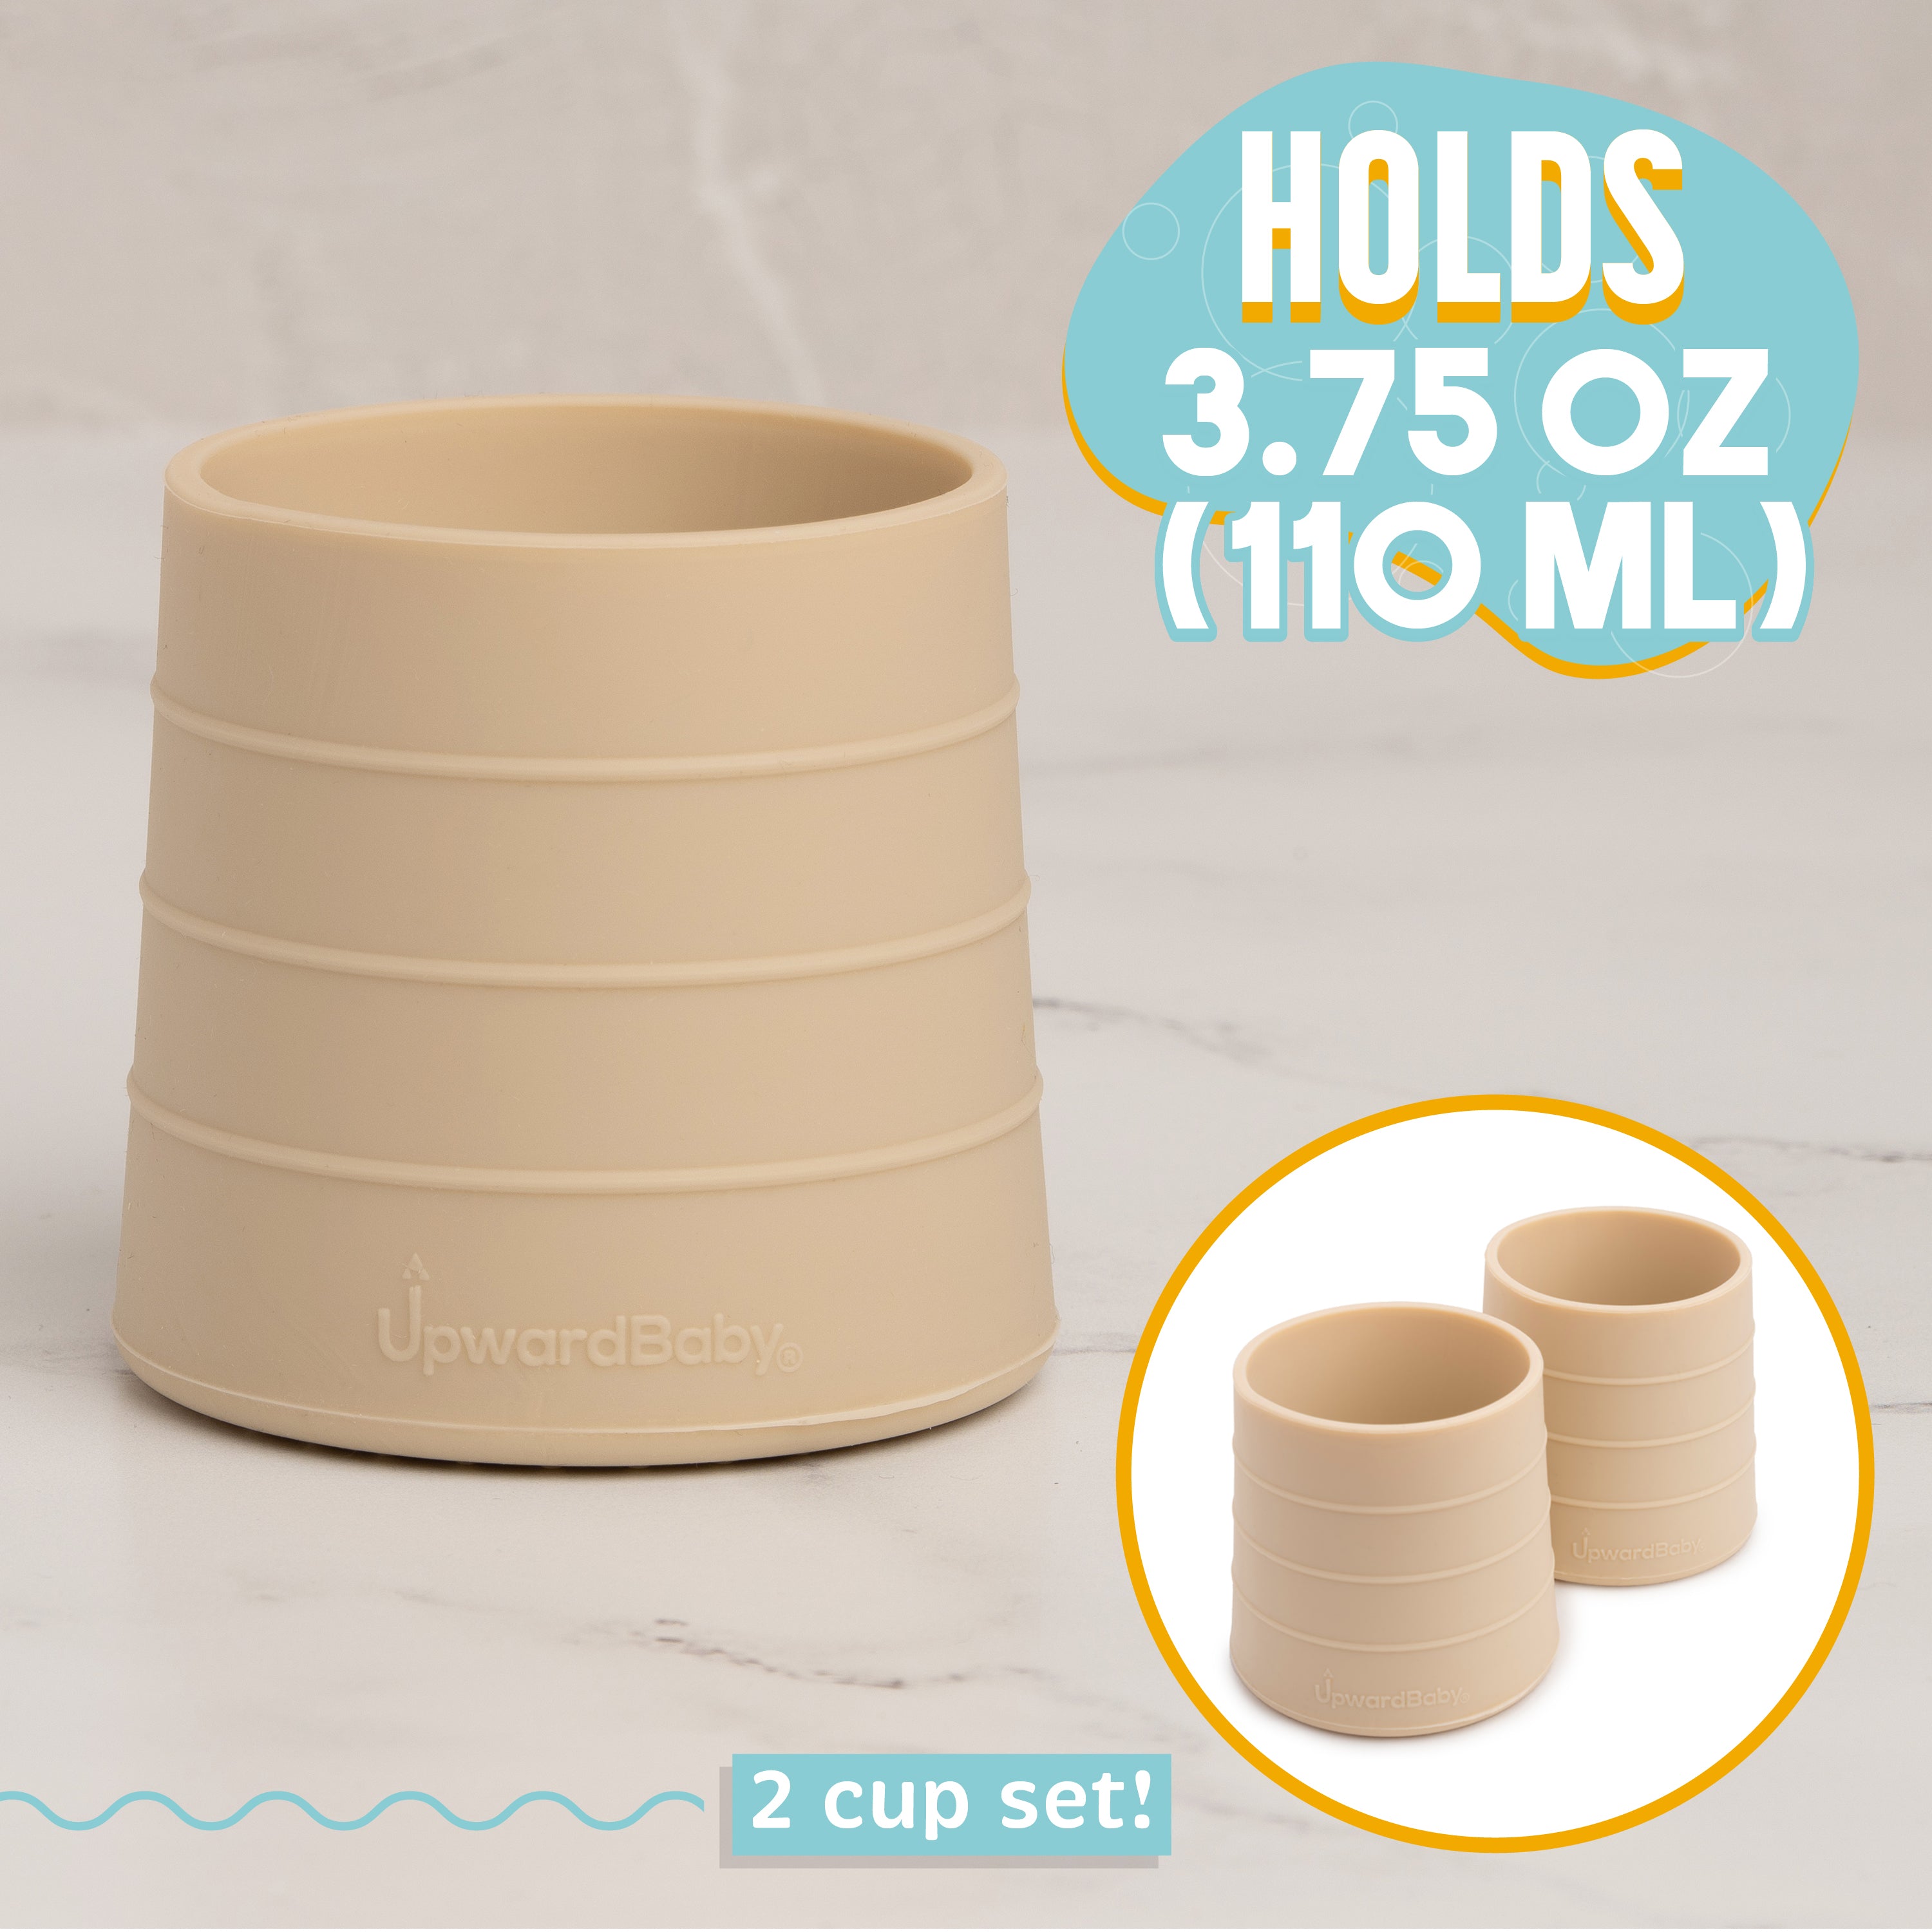 Upwardbaby Silicone Cups 2 PC Set - Transition Baby Open Cup from Bottle + Easy Grip Toddler Cups Spill Proof for 1 Year Old + Montessori Silicone Cu